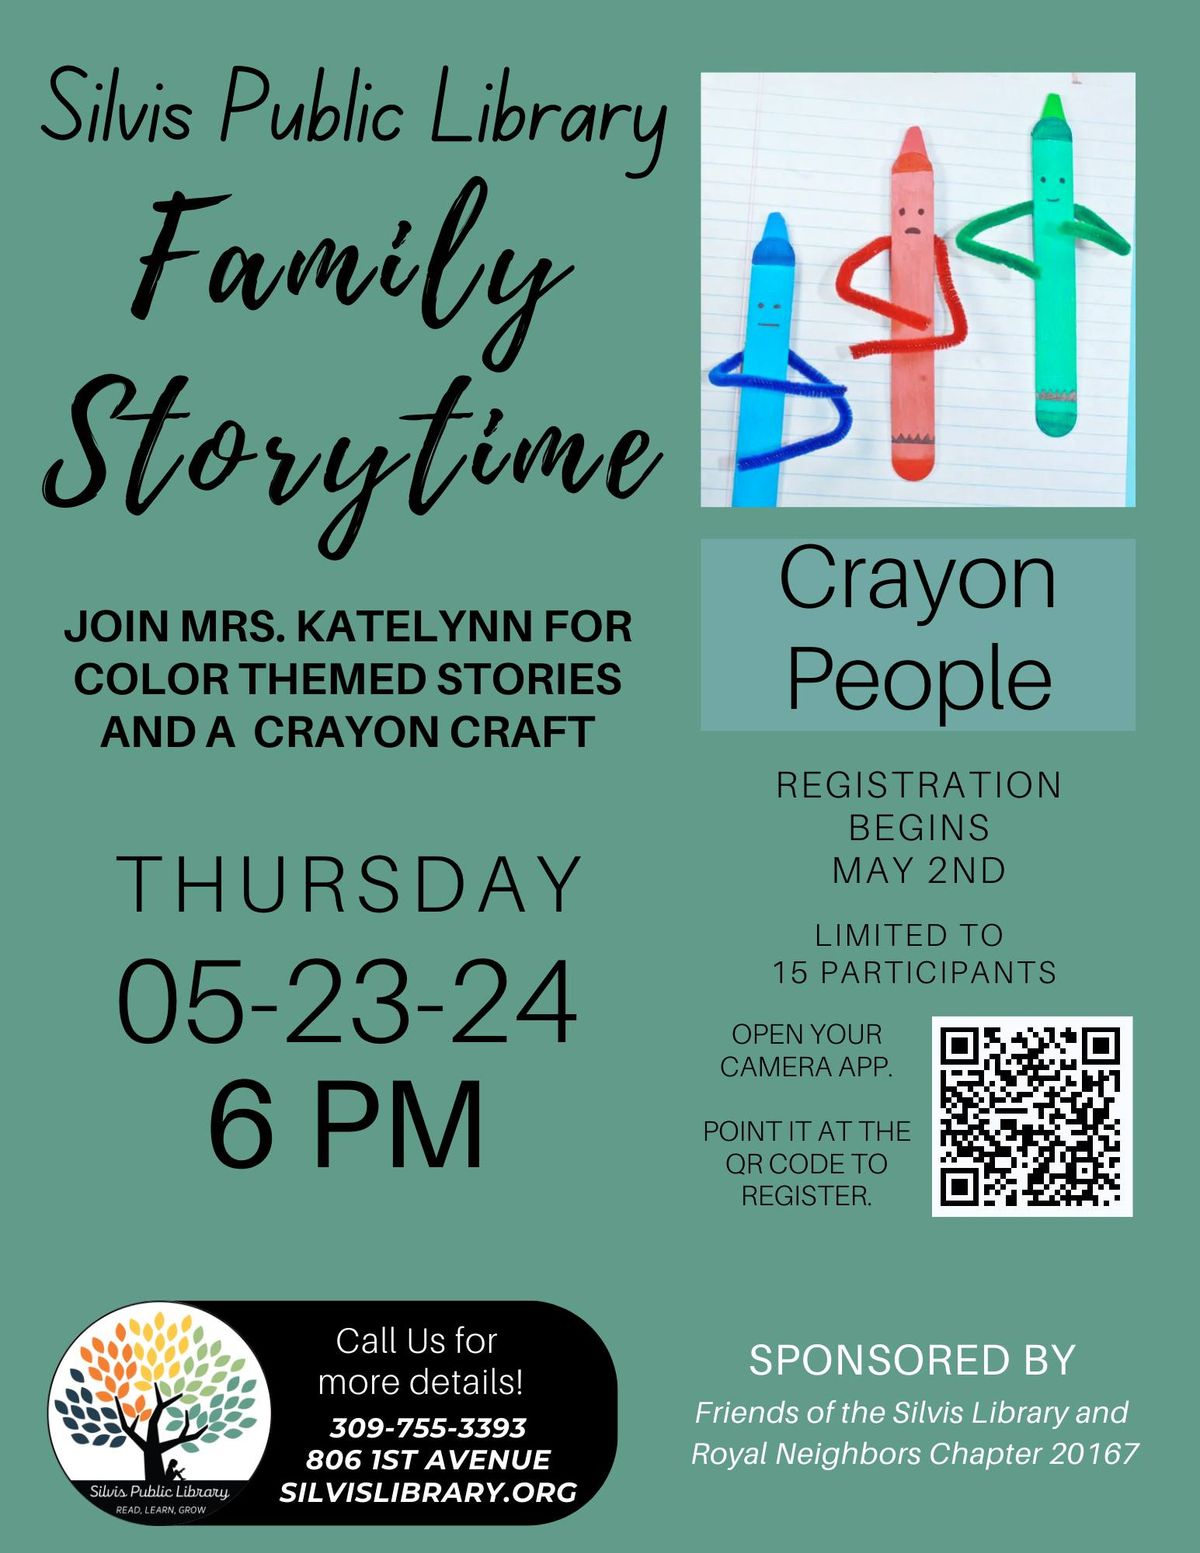 Family Storytime: Crayon People